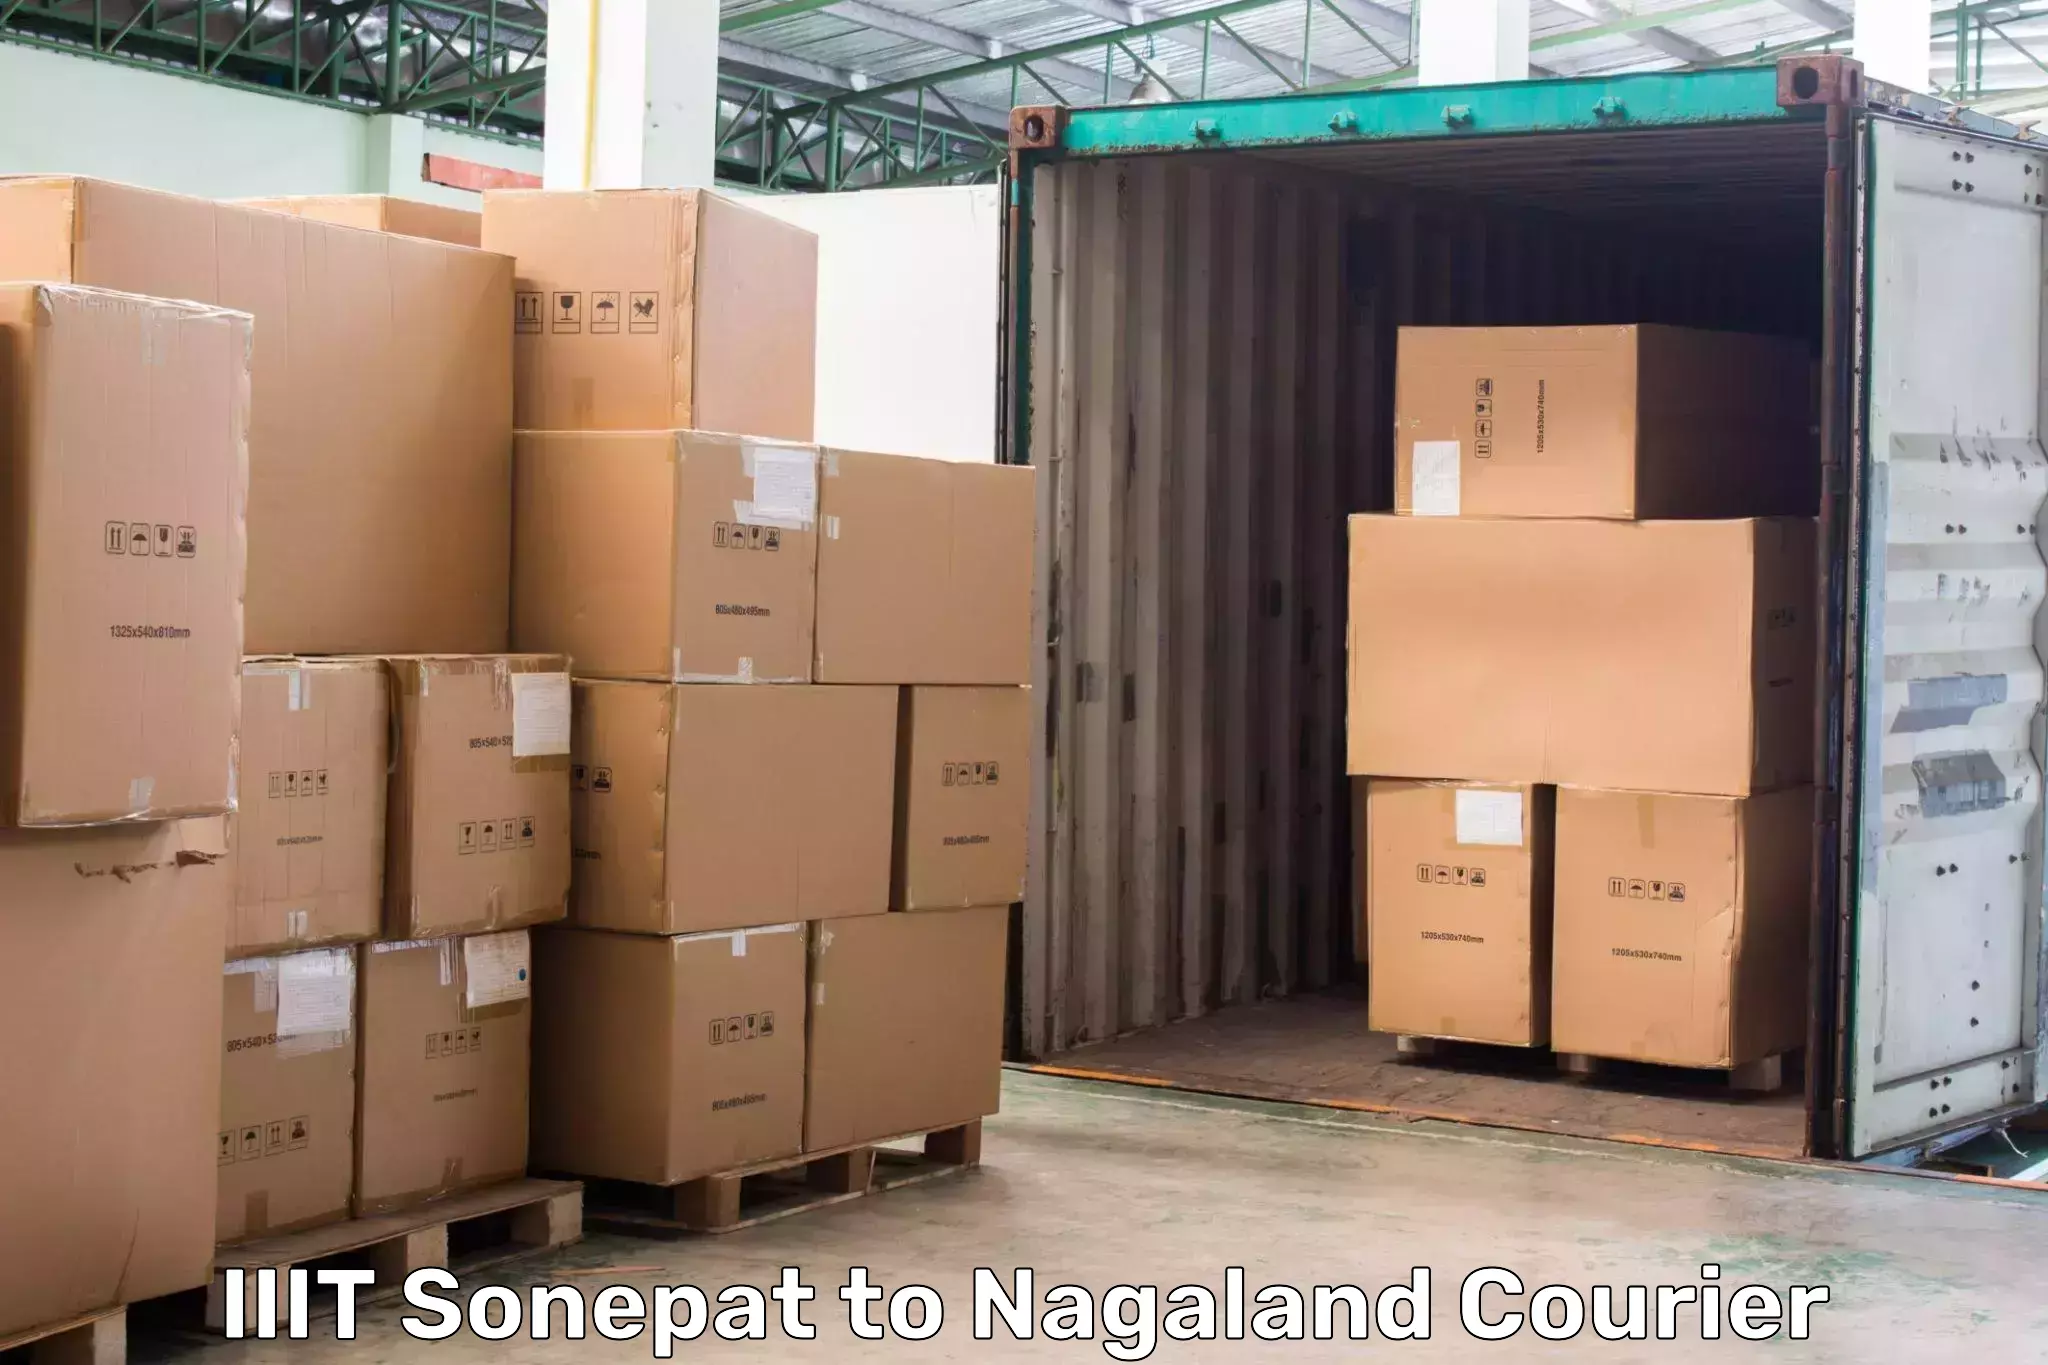 Multi-national courier services IIIT Sonepat to Nagaland